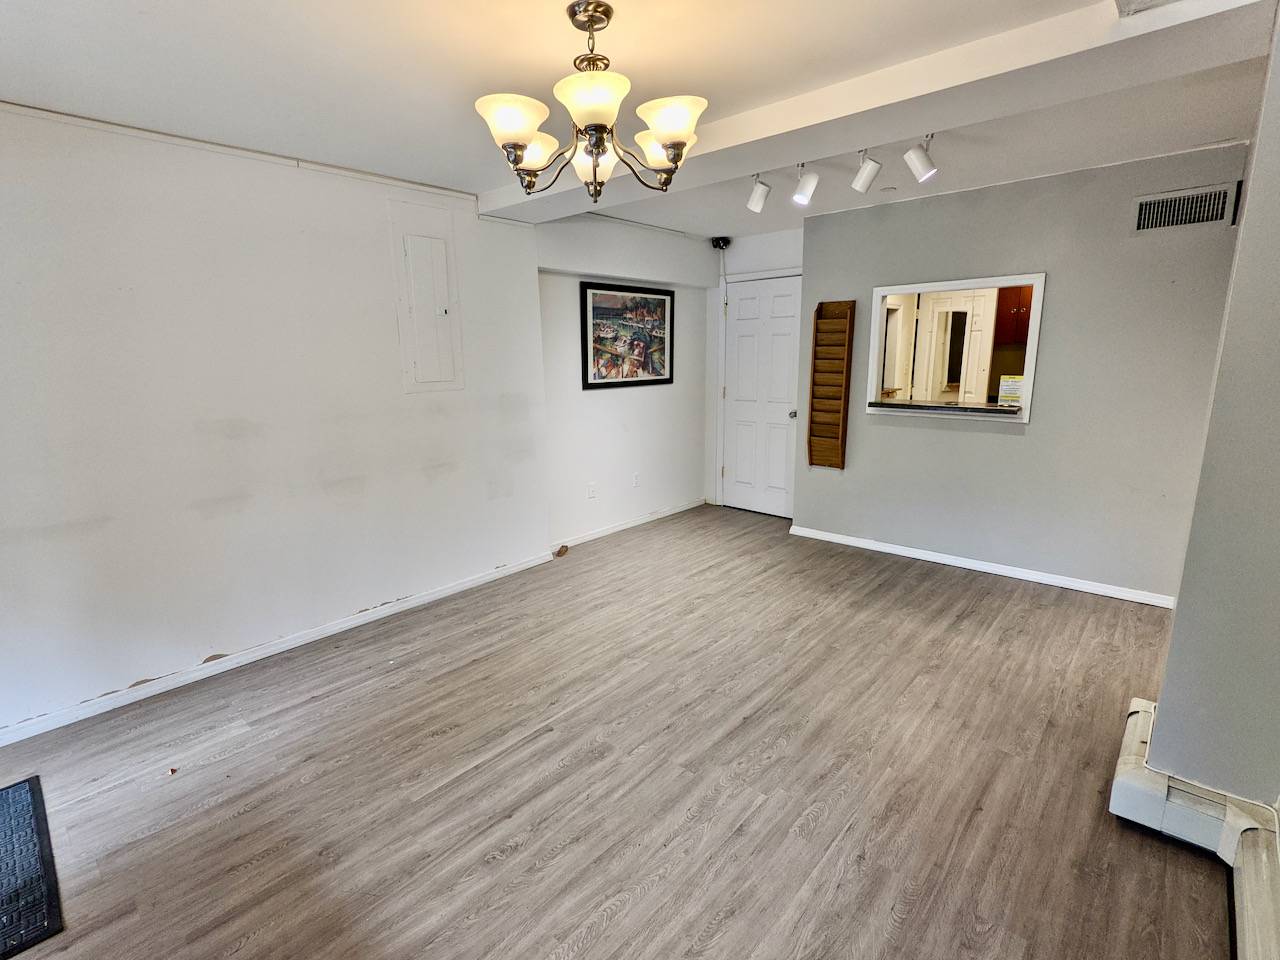 83 71 116th Street in Richmond Hill, Queens is a boutique condominium featuring a street level professional office space ideal for medical or dental use.